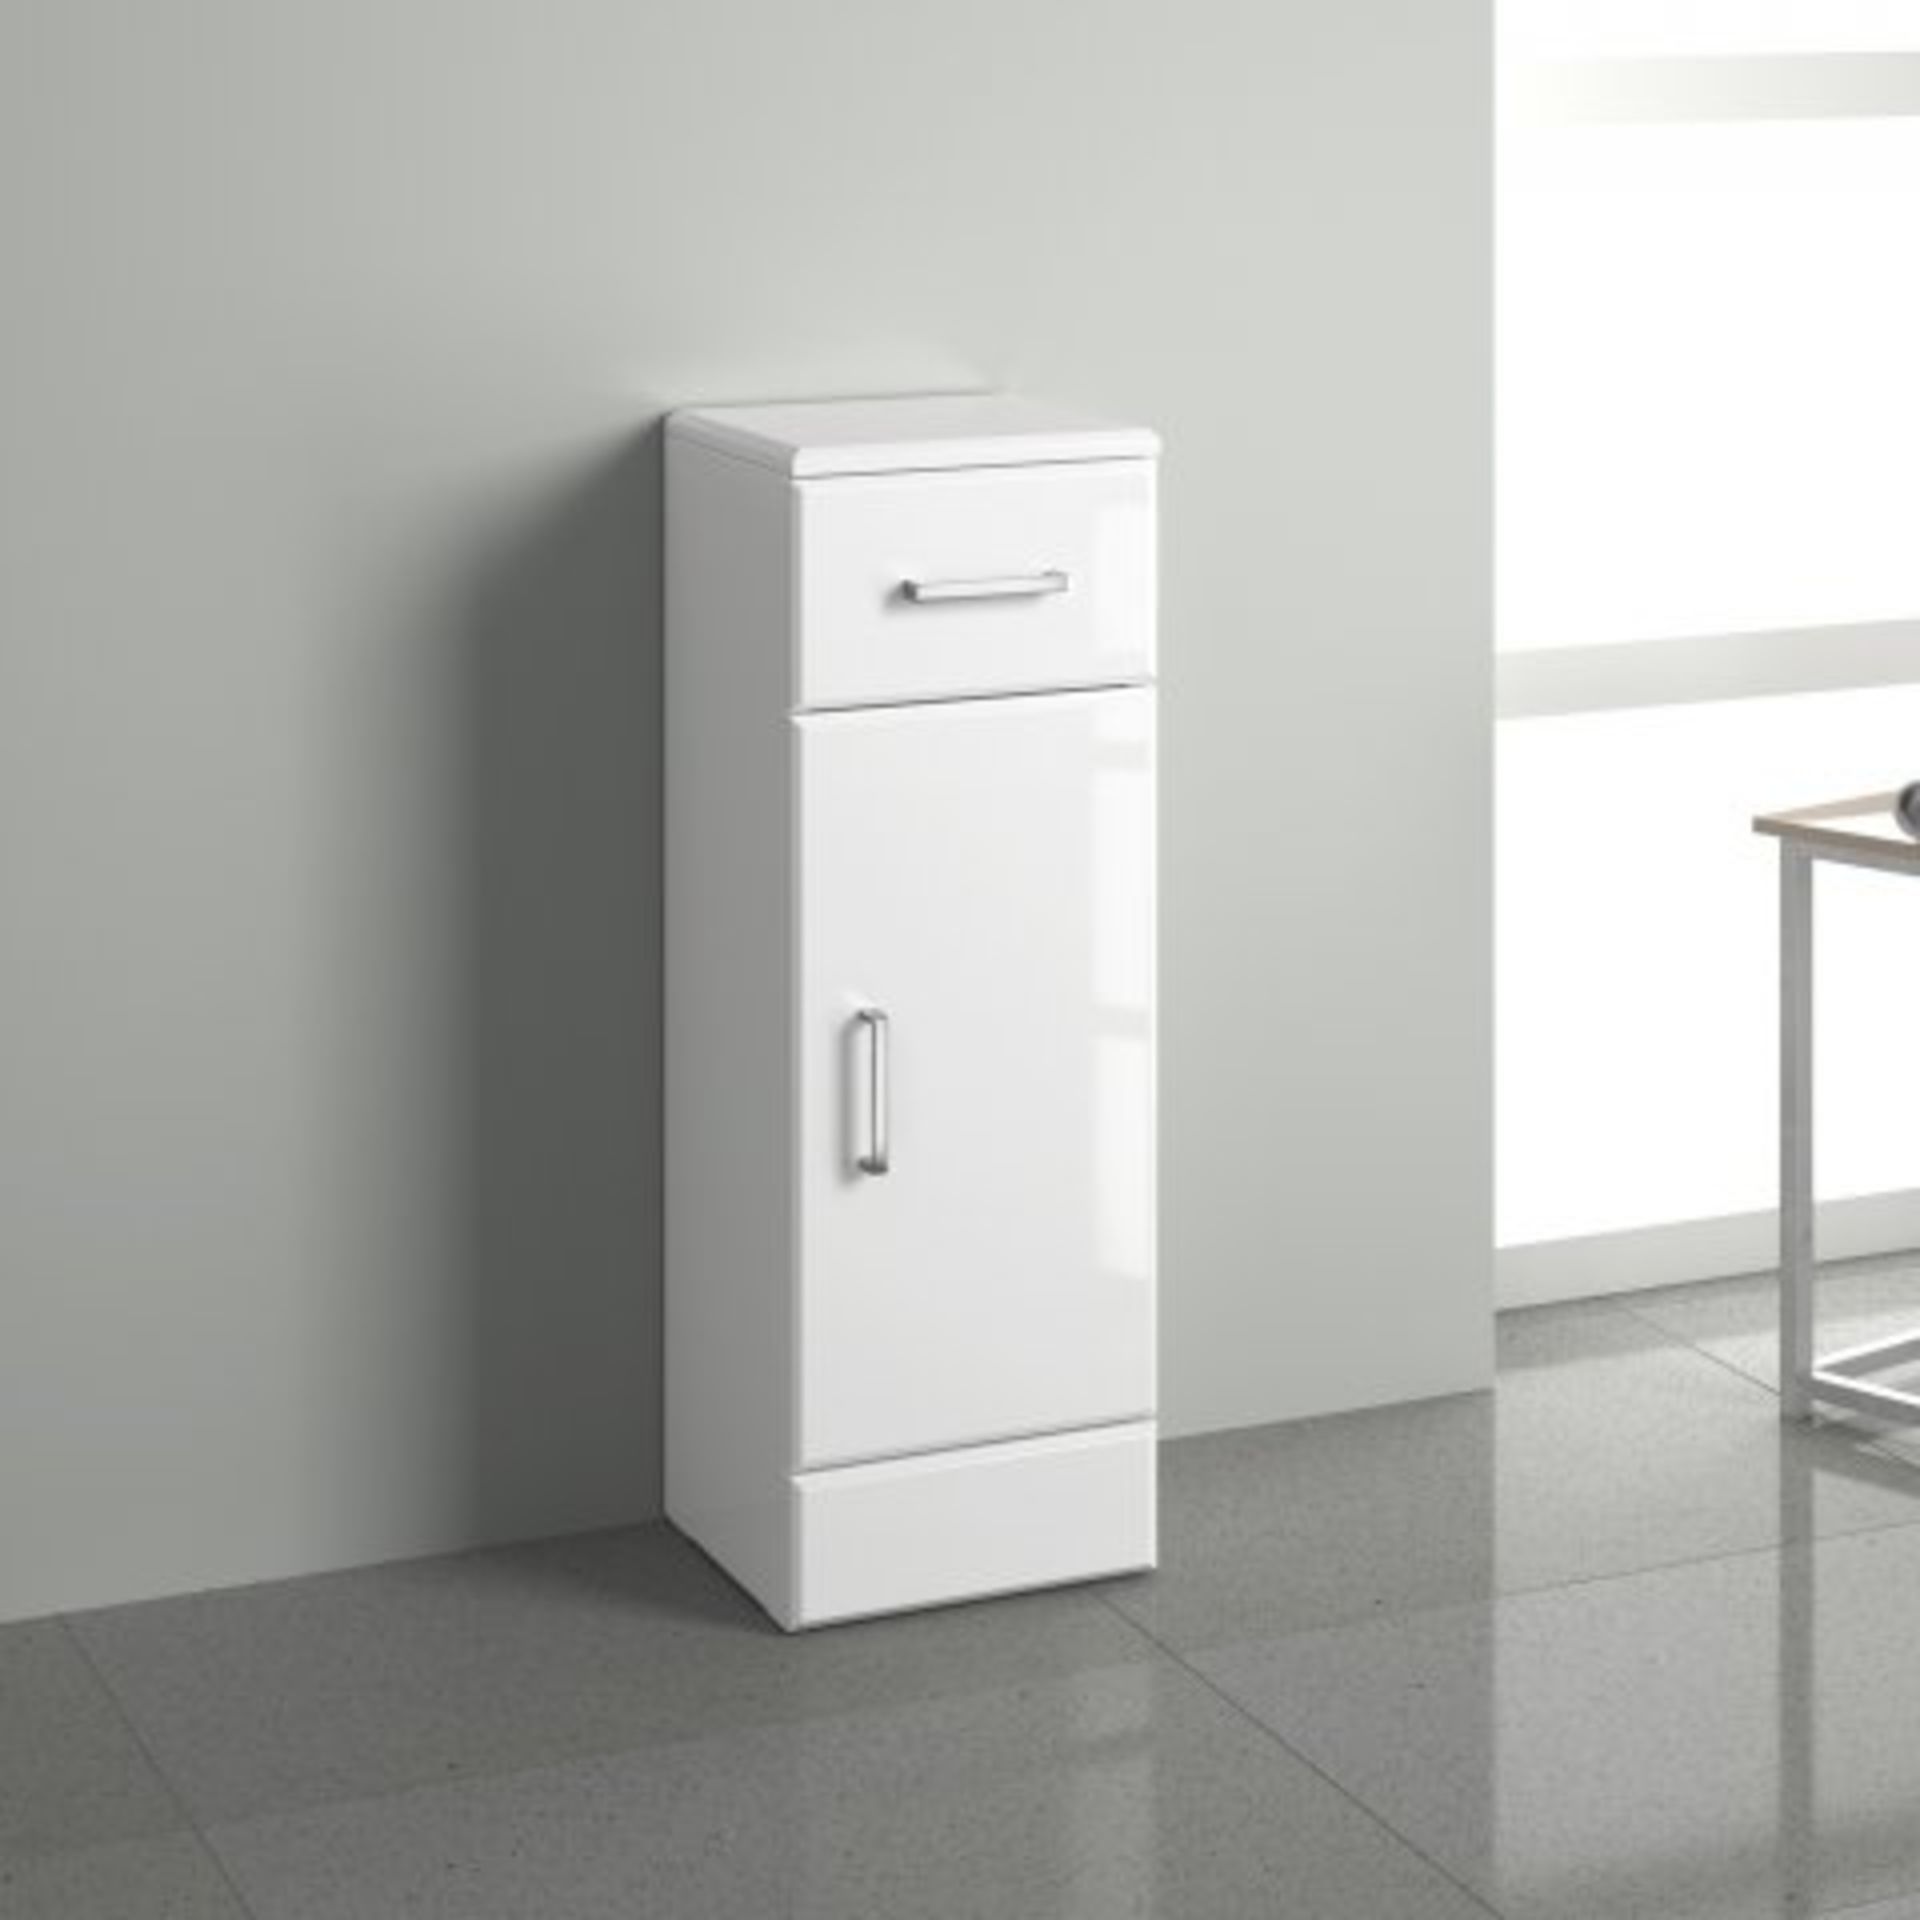 N53 - 250x330mm Quartz Gloss White Small Unit. RRP £143.98. This state-of-the-art white bathroom - Image 2 of 3